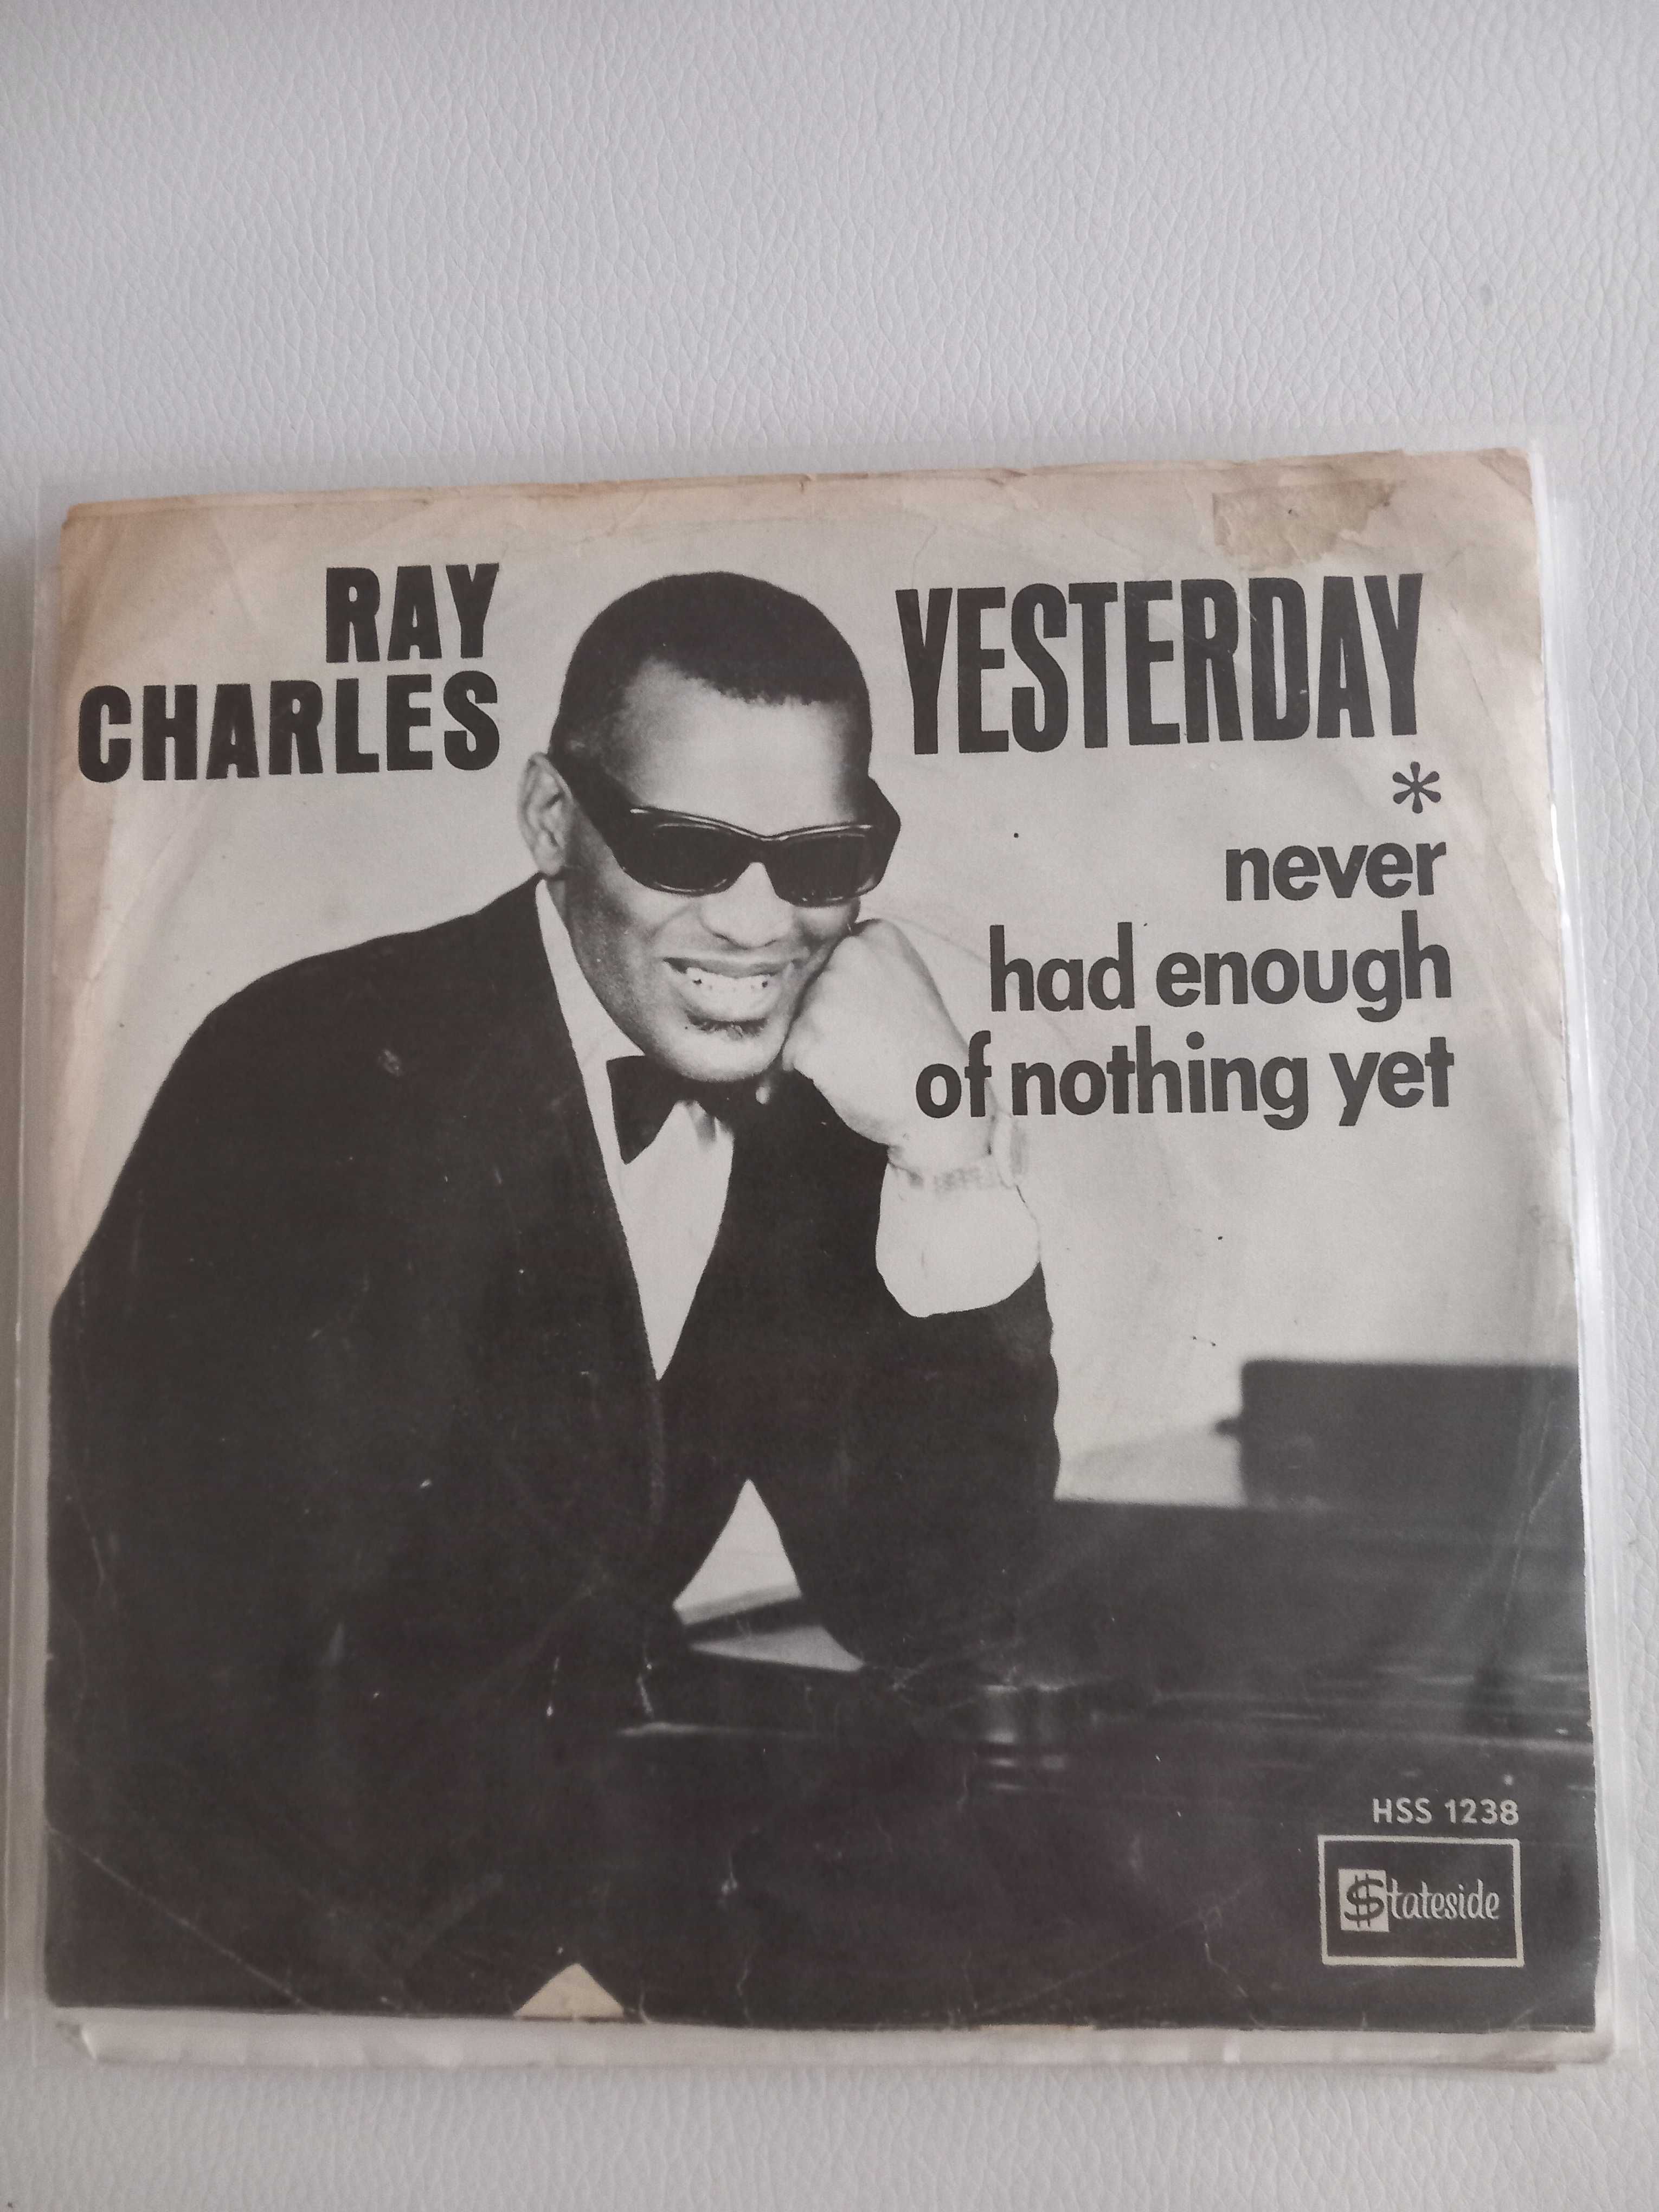 Ray Charles - yesterday / never had enough of nothing yet